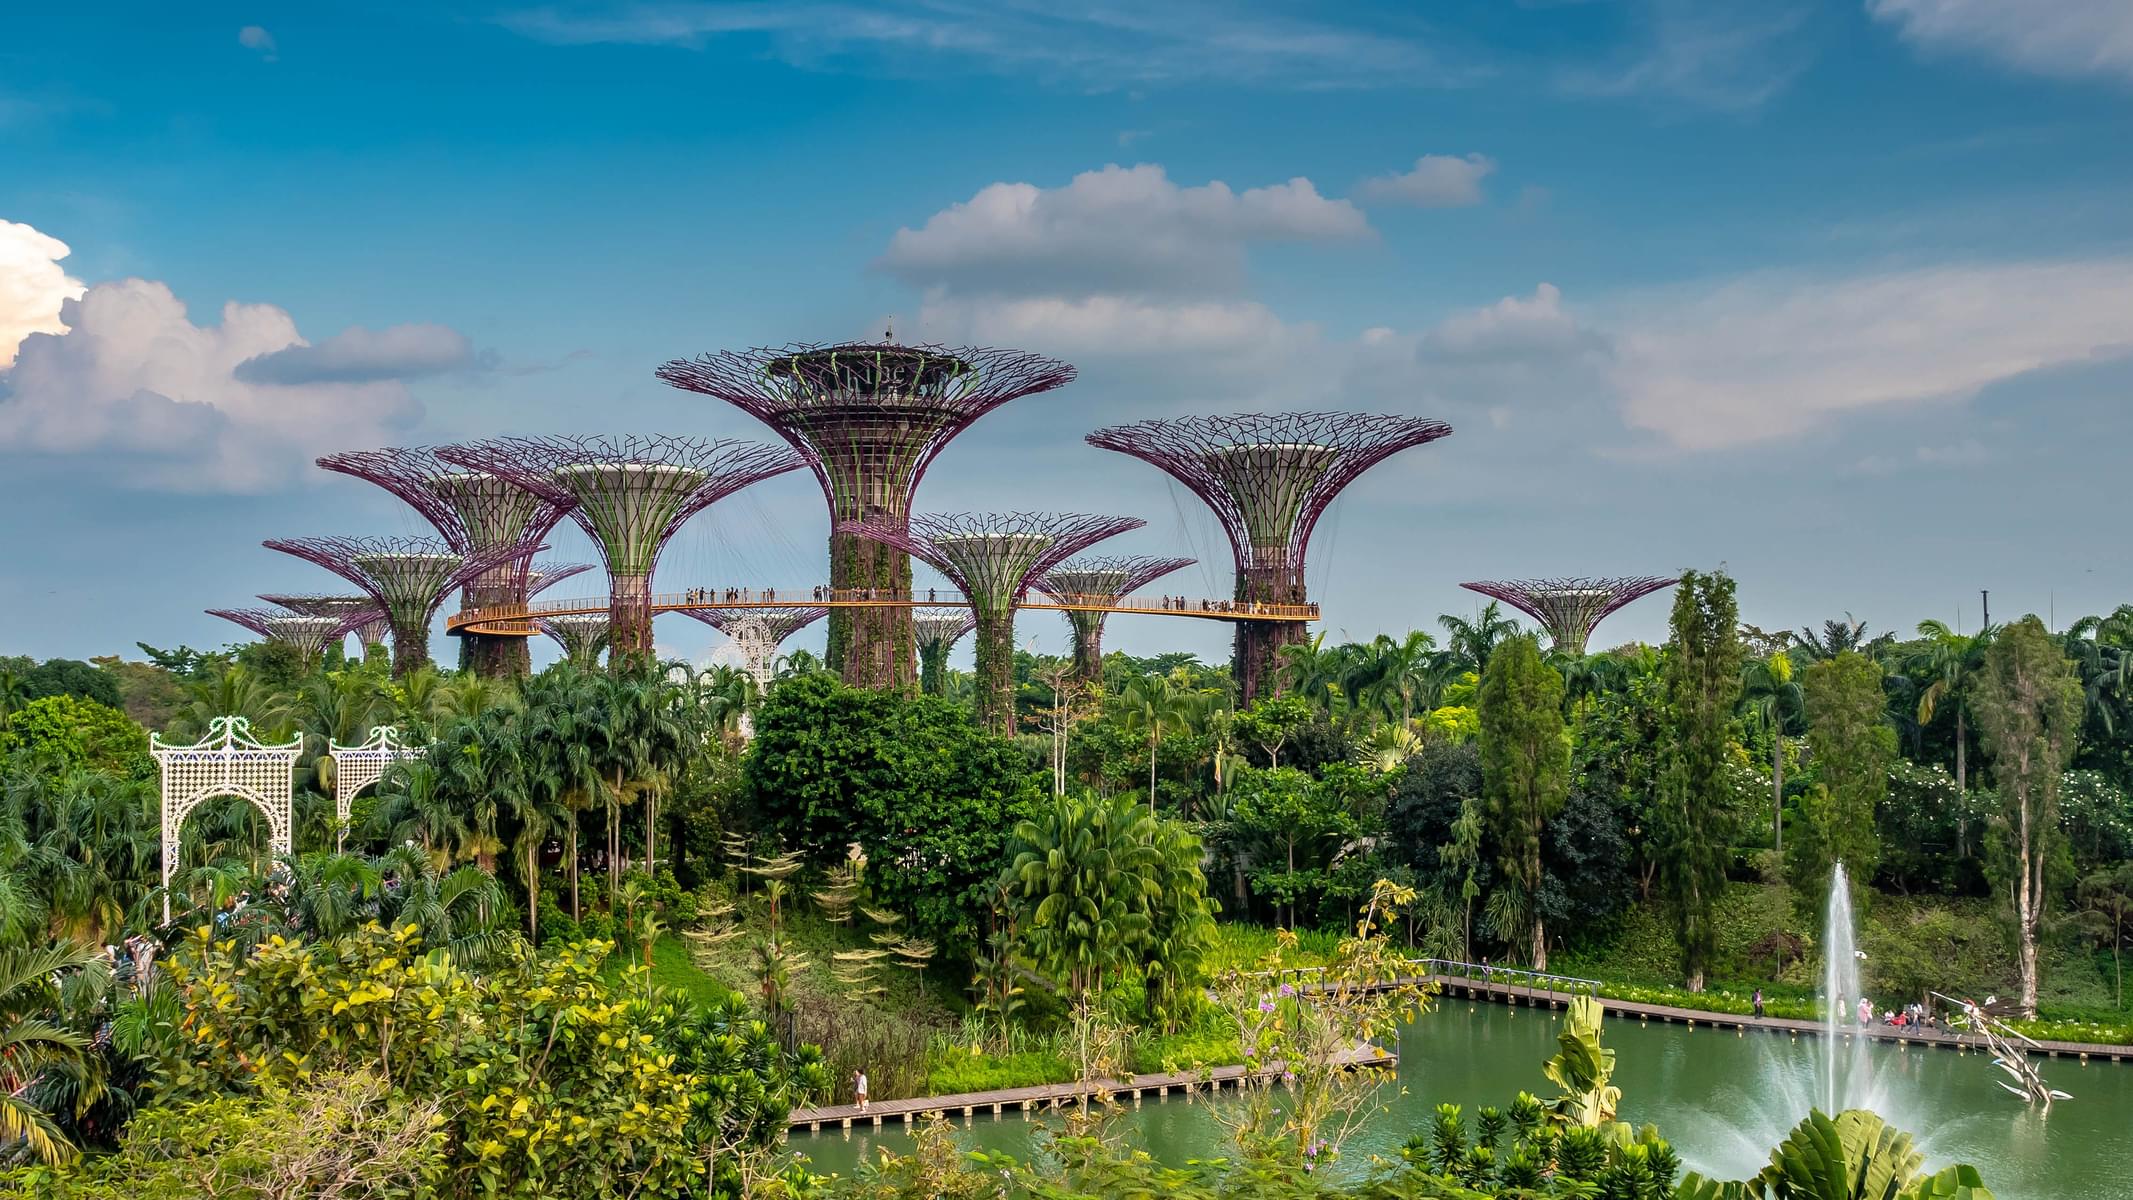 Explore Gardens by the Bay